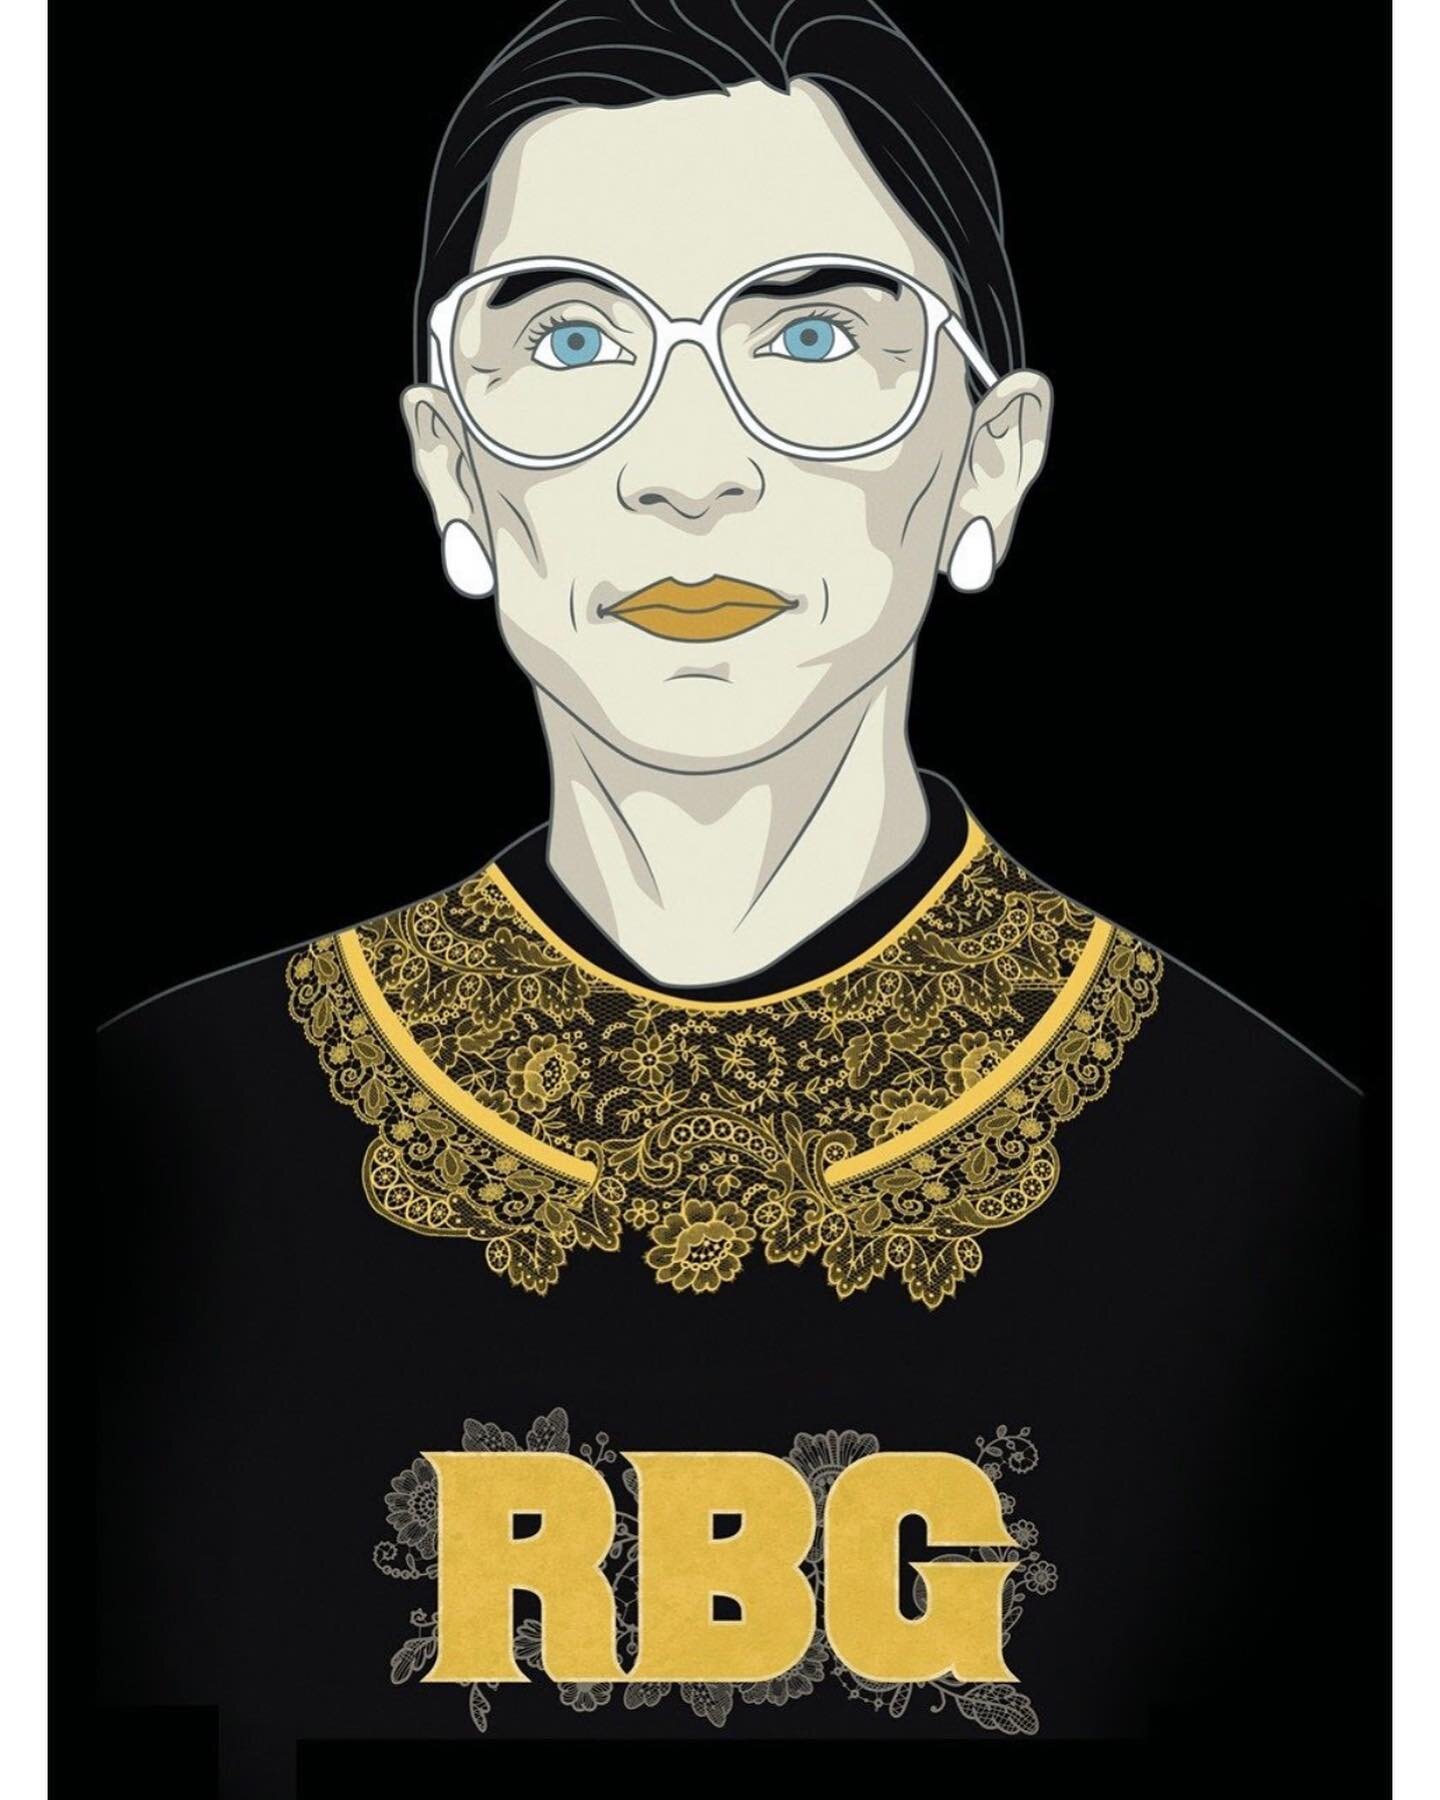 I will say it again:
All the wrong people are dying 😢
#ruthbaderginsburg